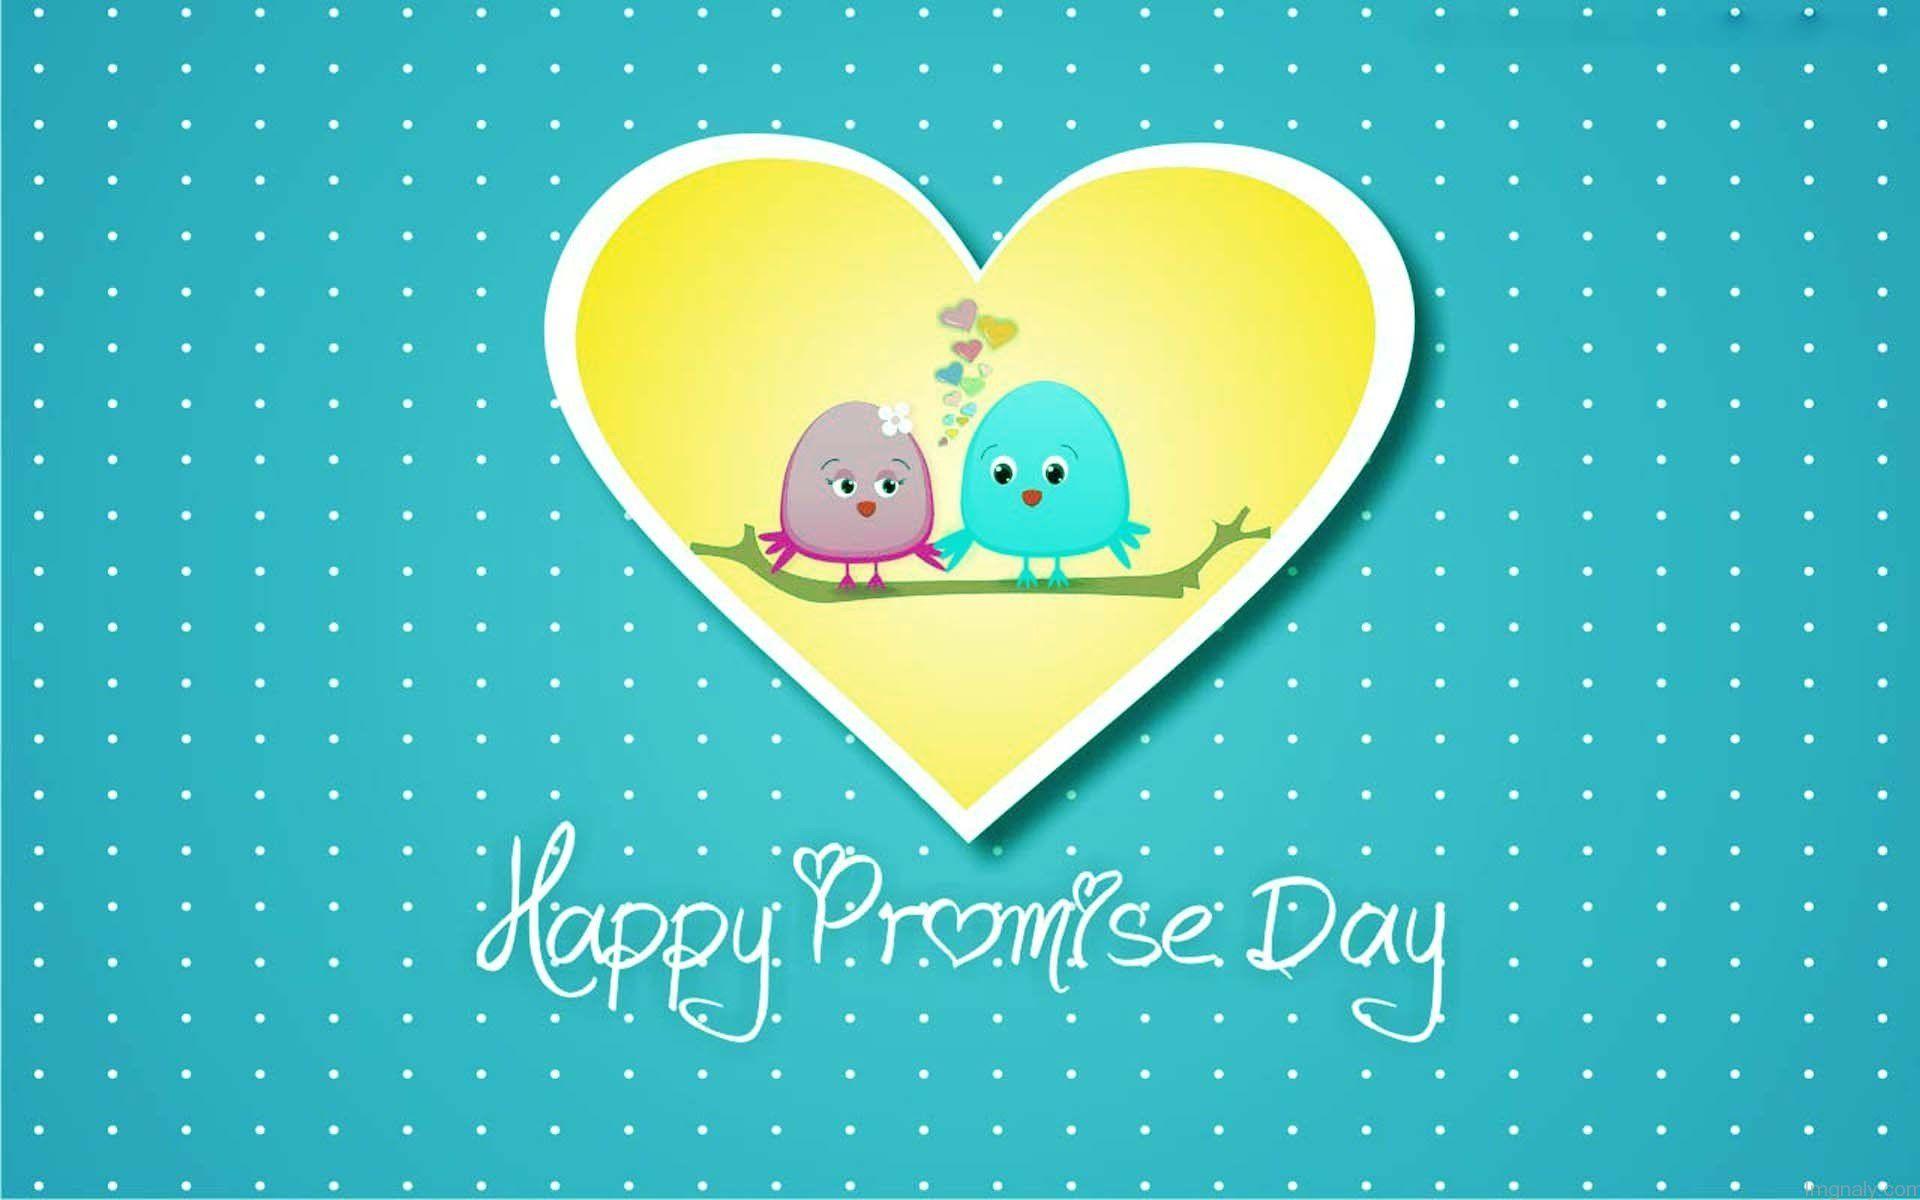 Promise Day 2018 Quotes In Hindiगरलफरड क य Sms भजन त बनत ह  Promise  Day 2018 Quotes Sms Wallpapers Images Shayari In Hindi For Girlfriend   Amar Ujala Hindi News Live